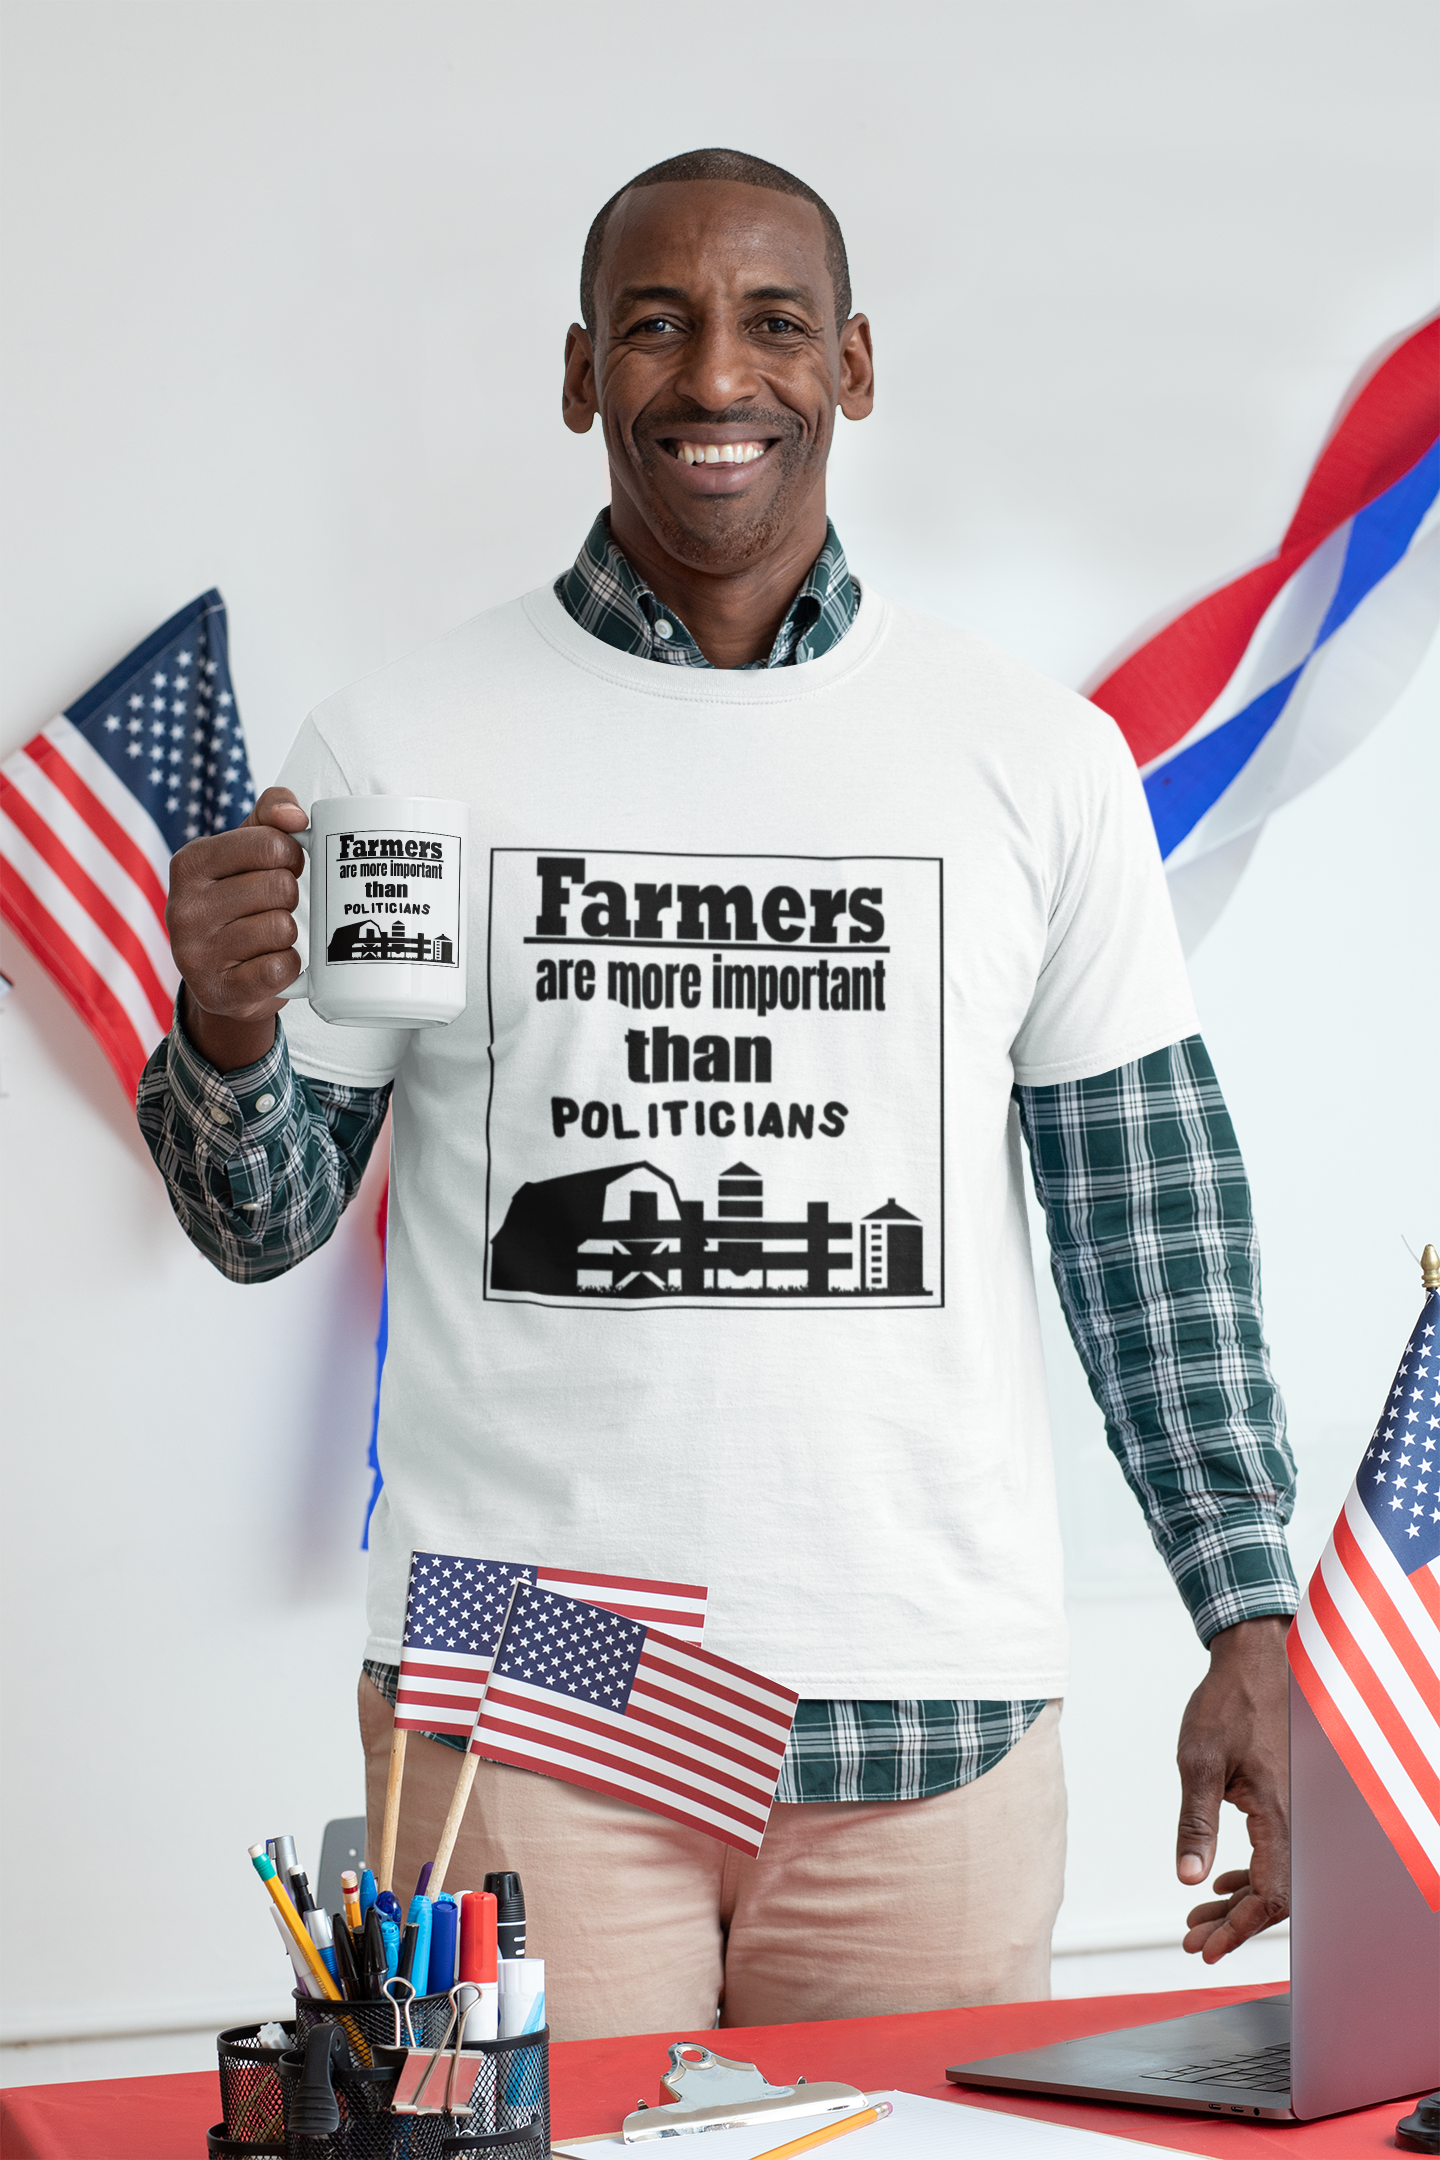 Farmers are more important than politicians unixex tshirt dads day gift gift for boyfriend gift for dad gift for grandpa gift for her gift for him gift for husband gift for mom gift for sister gift for wife gift idea moms gift mothers day gift school gift teacher gift Unique gift